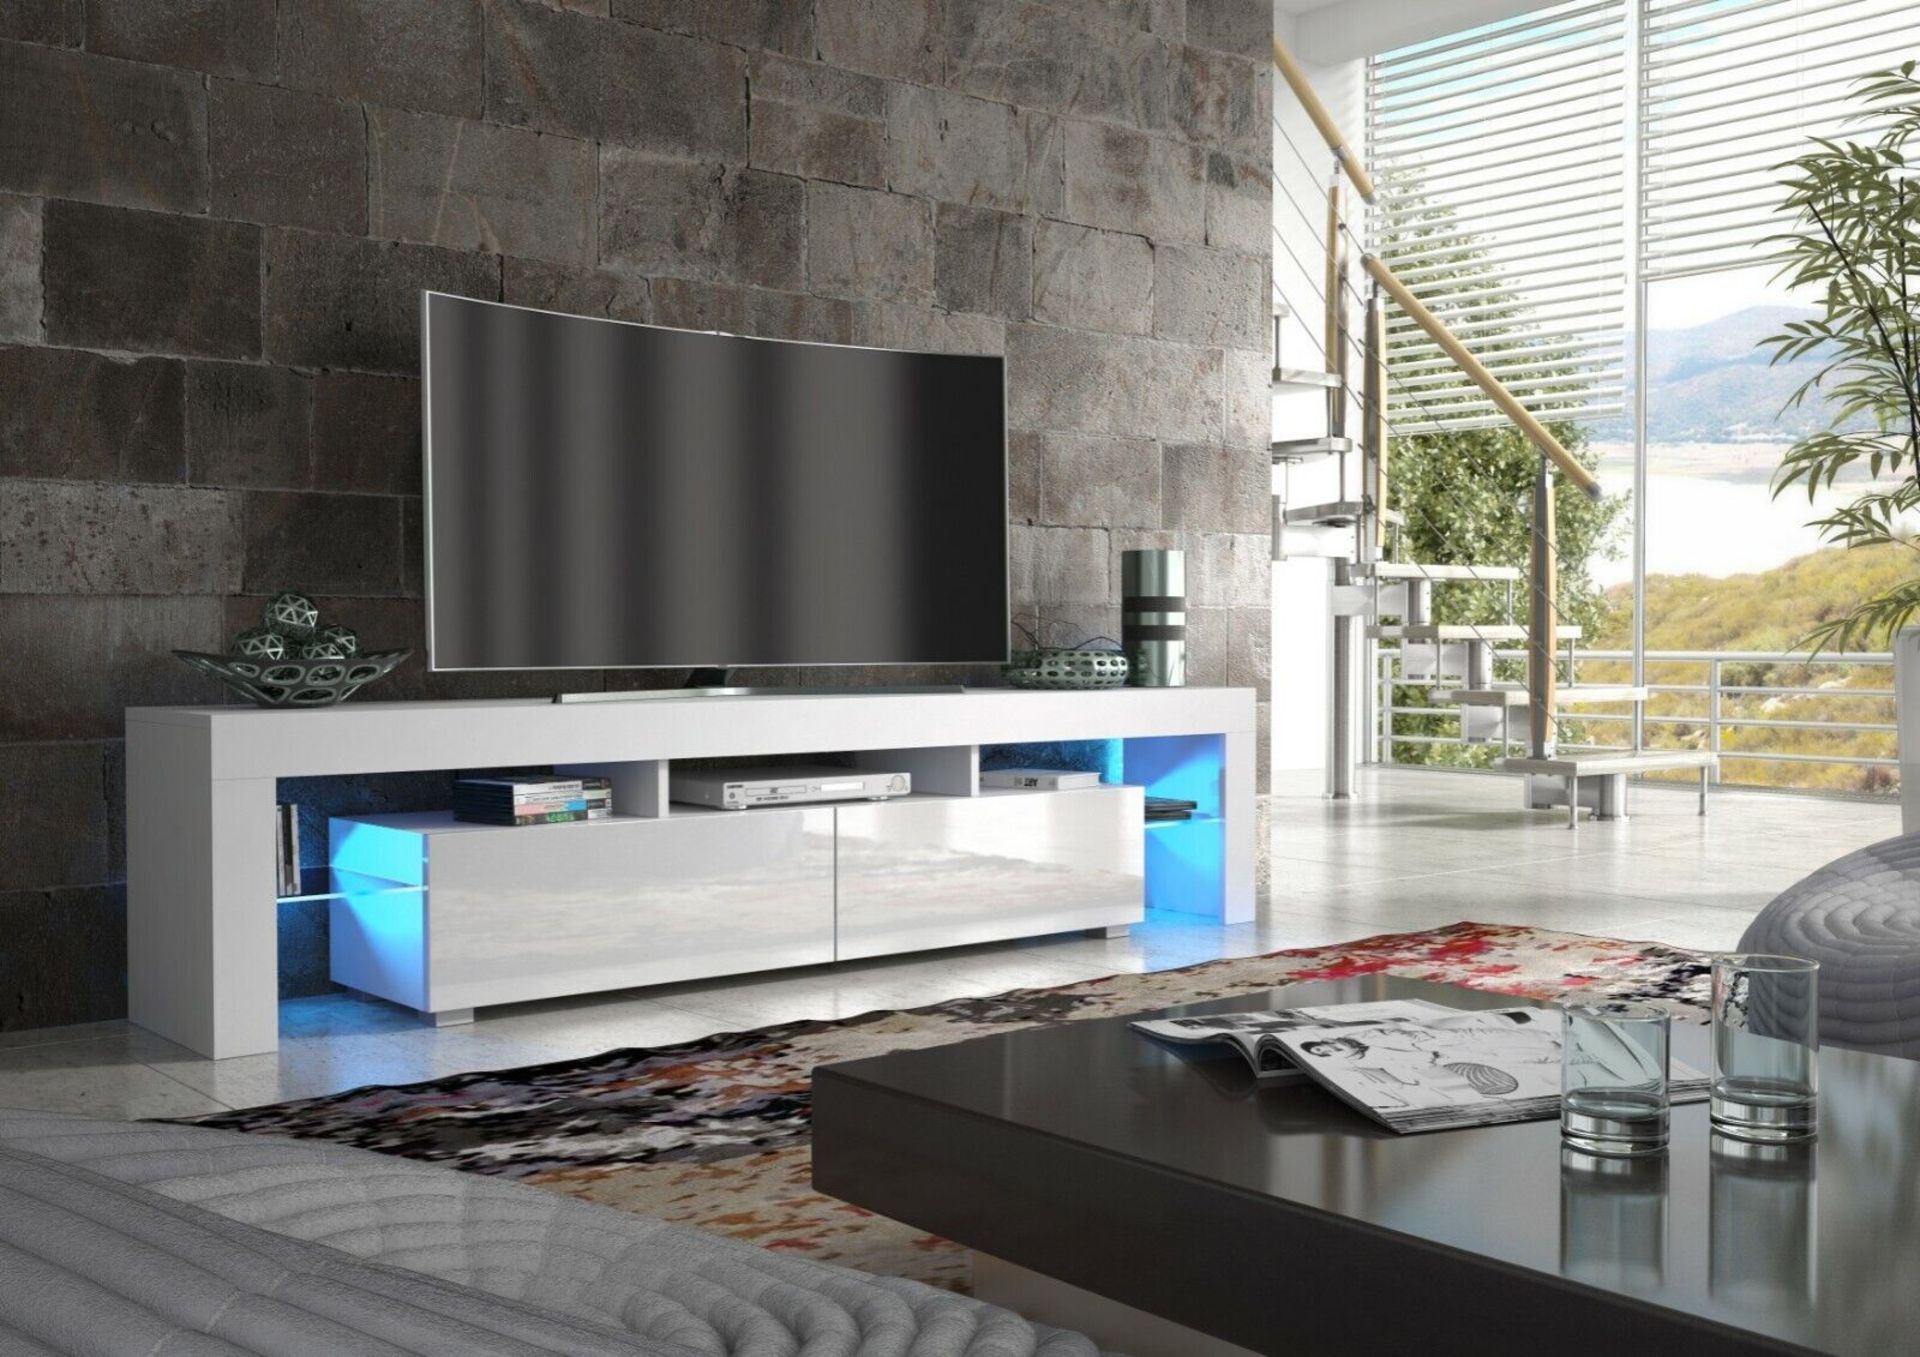 MODERN 160CM TV UNIT CABINET TV STAND HIGH GLOSS DOORS WITH FREE LEDS - Image 2 of 3